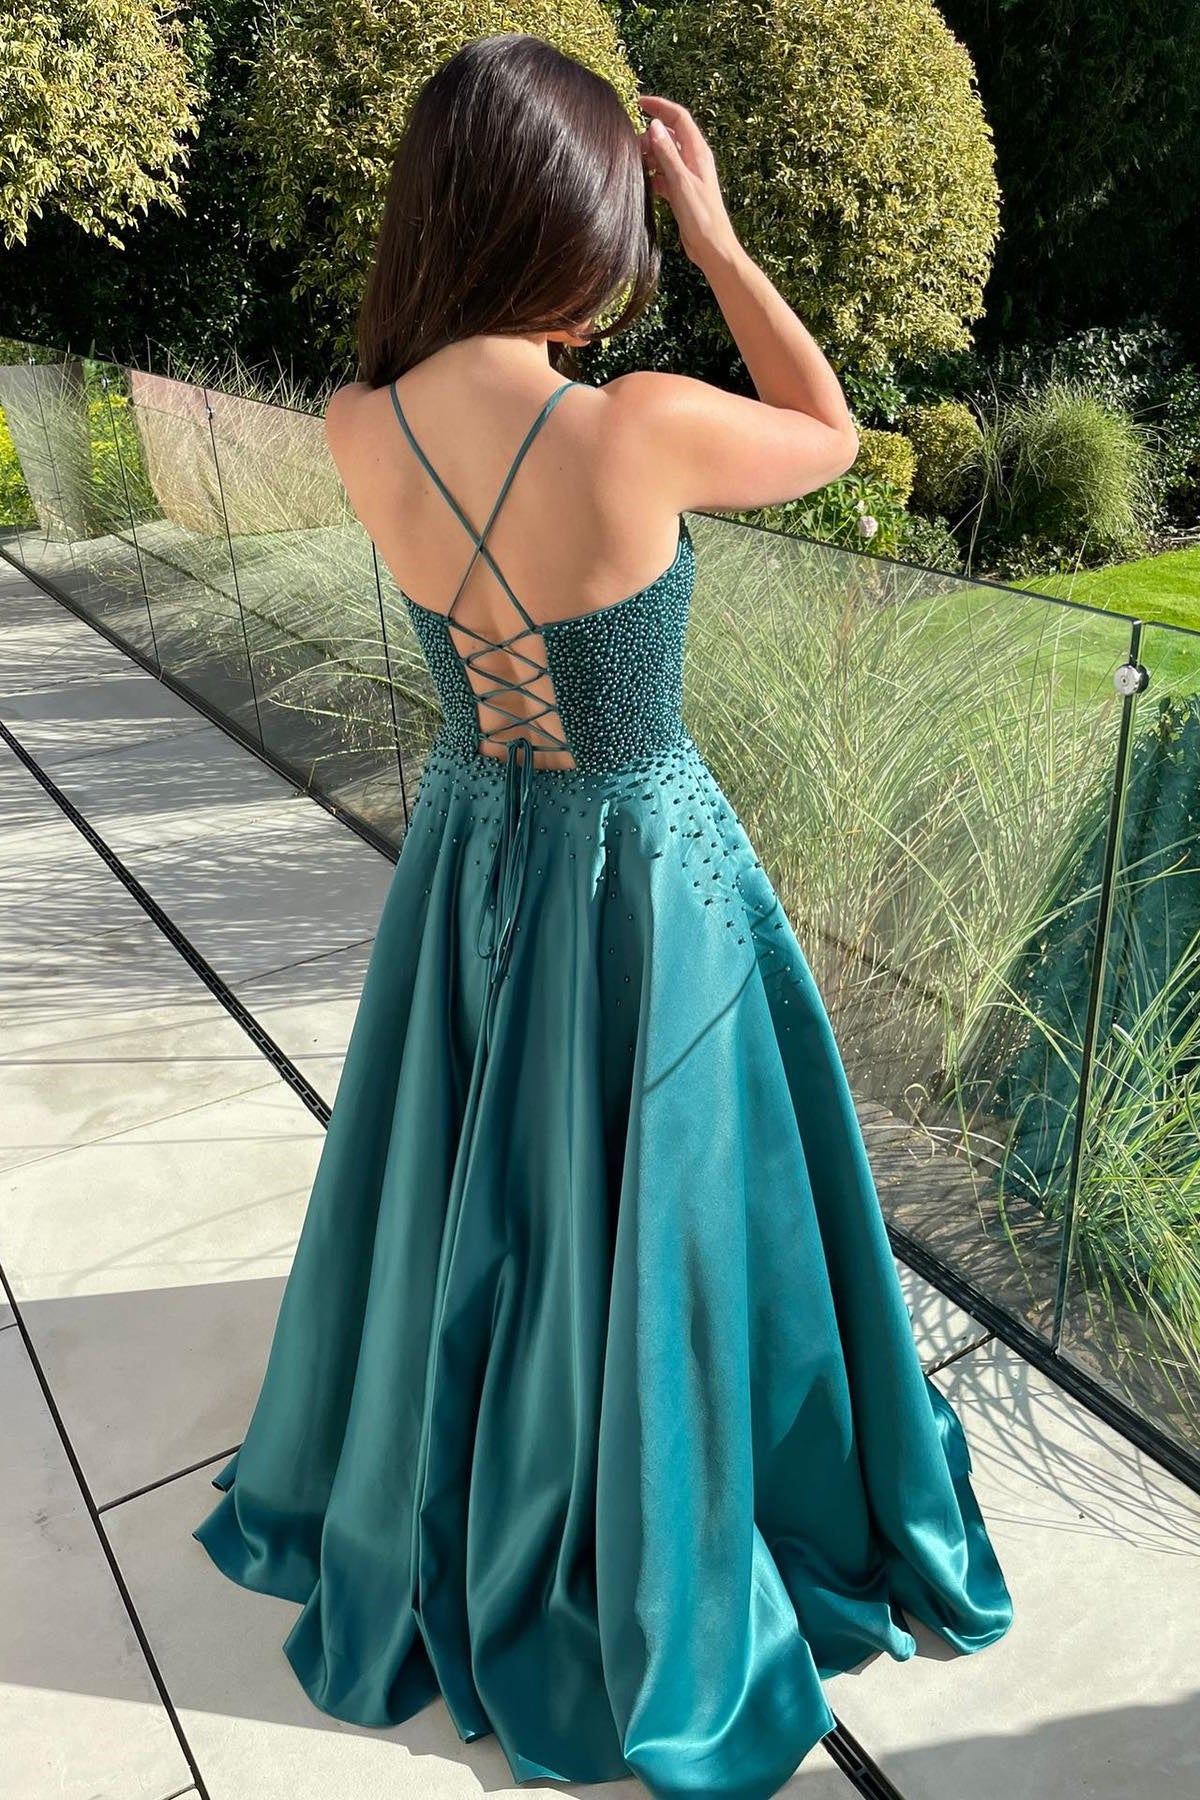 Introduction to Lace-Up Back Prom Dresses